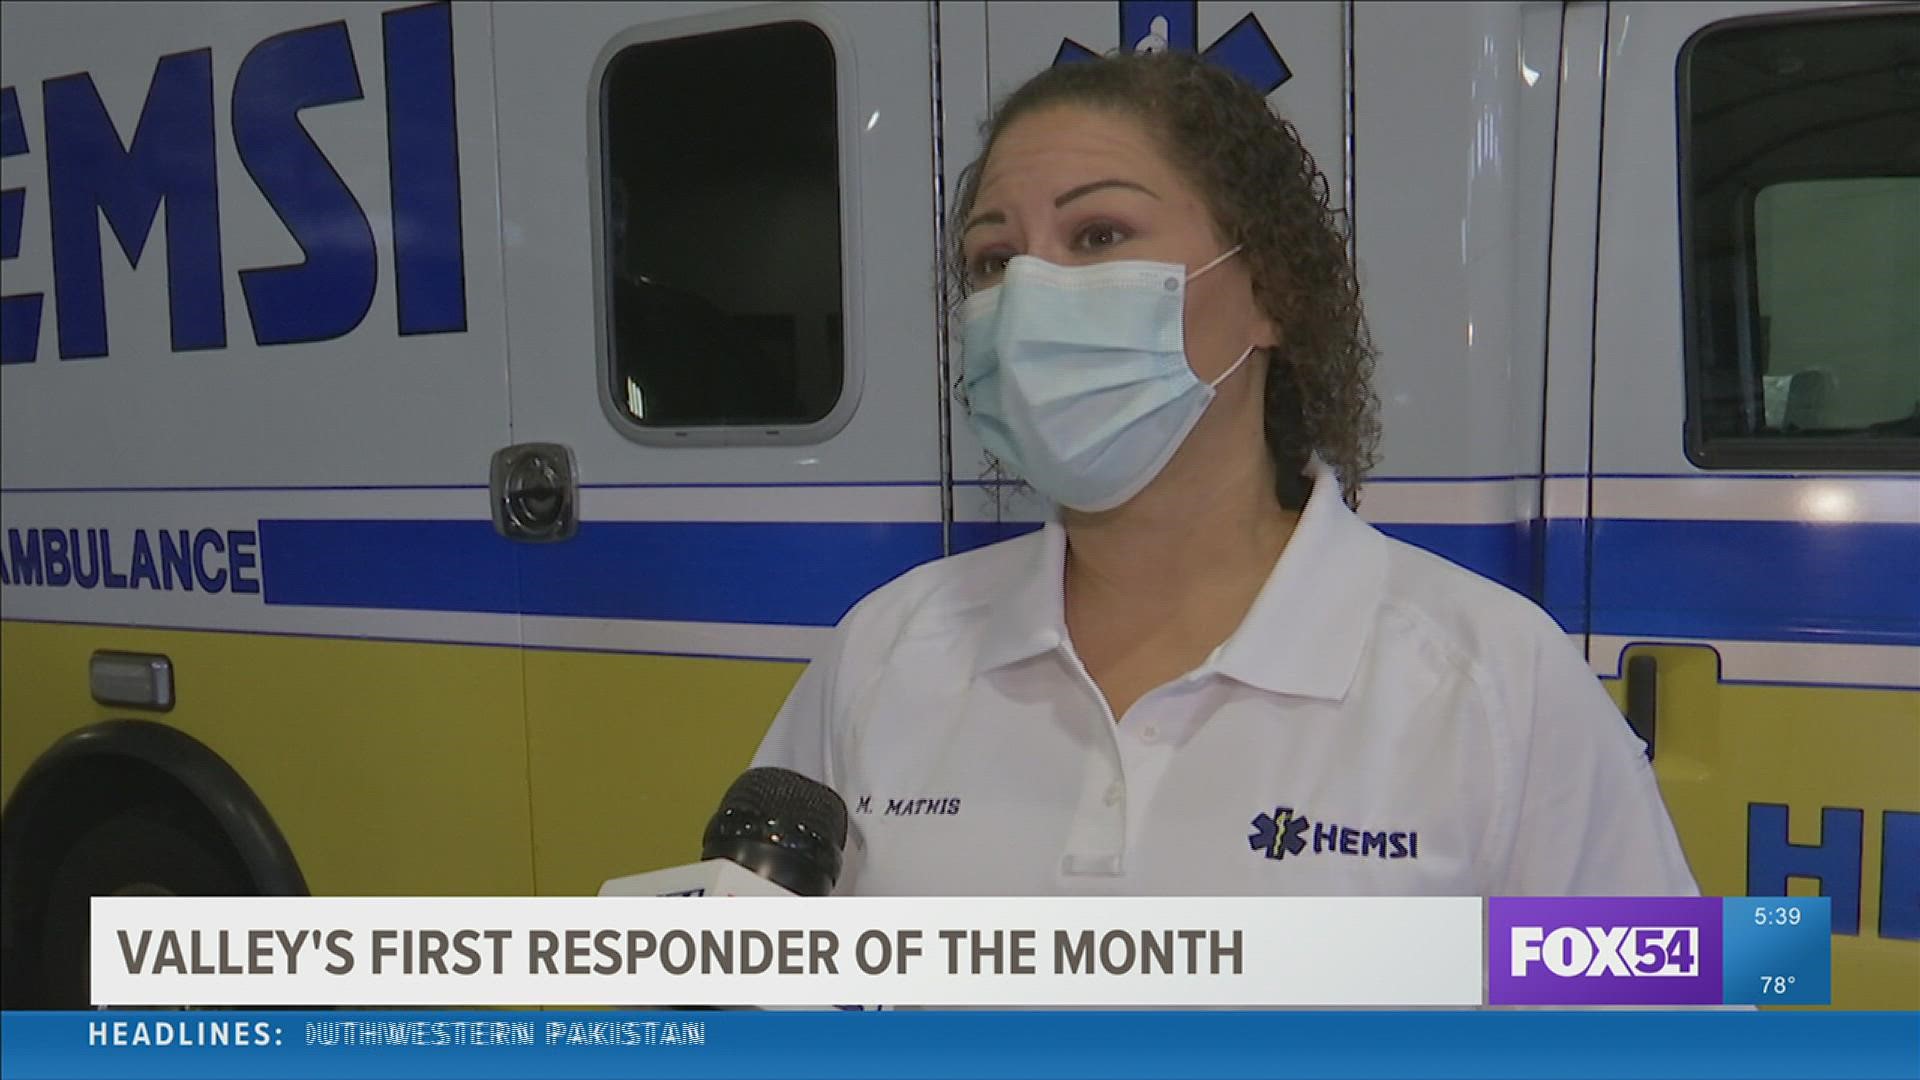 We know first responders risk their lives to save others, and one HEMSI paramedic goes above and beyond by focusing on her patients' mental health as well.